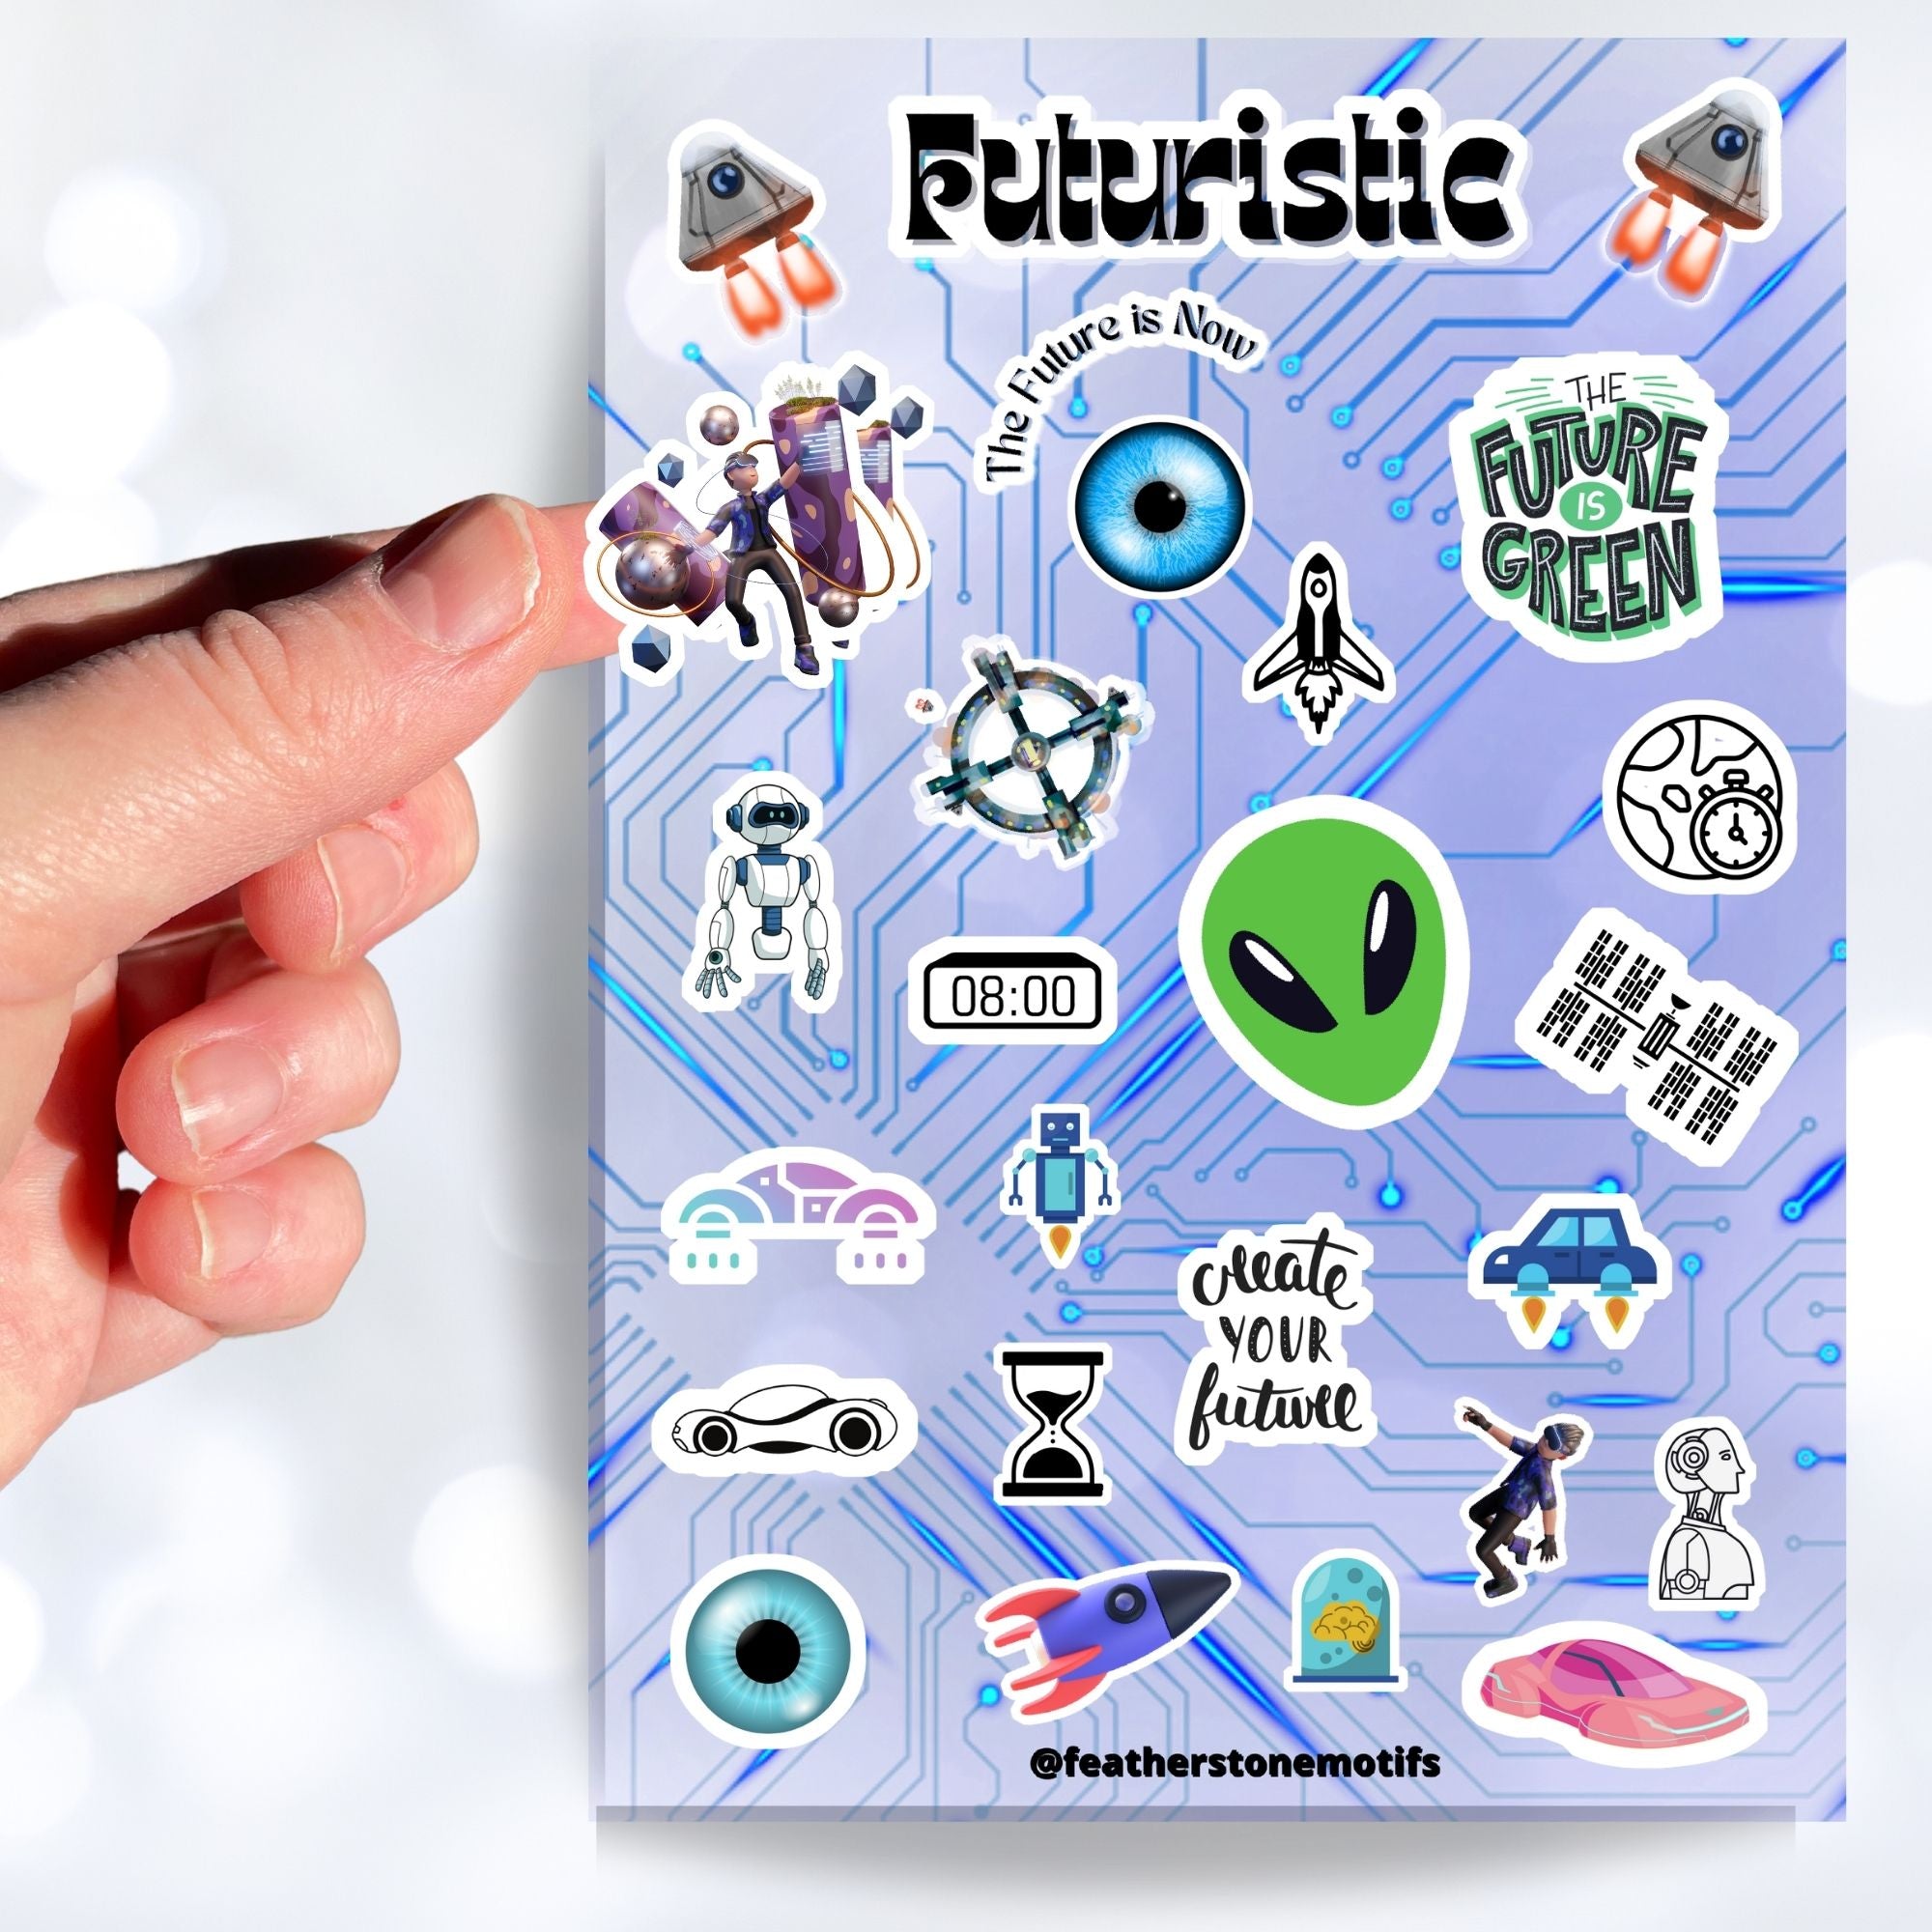 Set on a background of a circuit board, this sticker sheet is filled with futuristic sticker images like rocket ships, flying cars, aliens, and robots, and it has a holographic star overlay! This image shows a hand holding a sticker of person in a 3D metaverse over the sticker sheet.